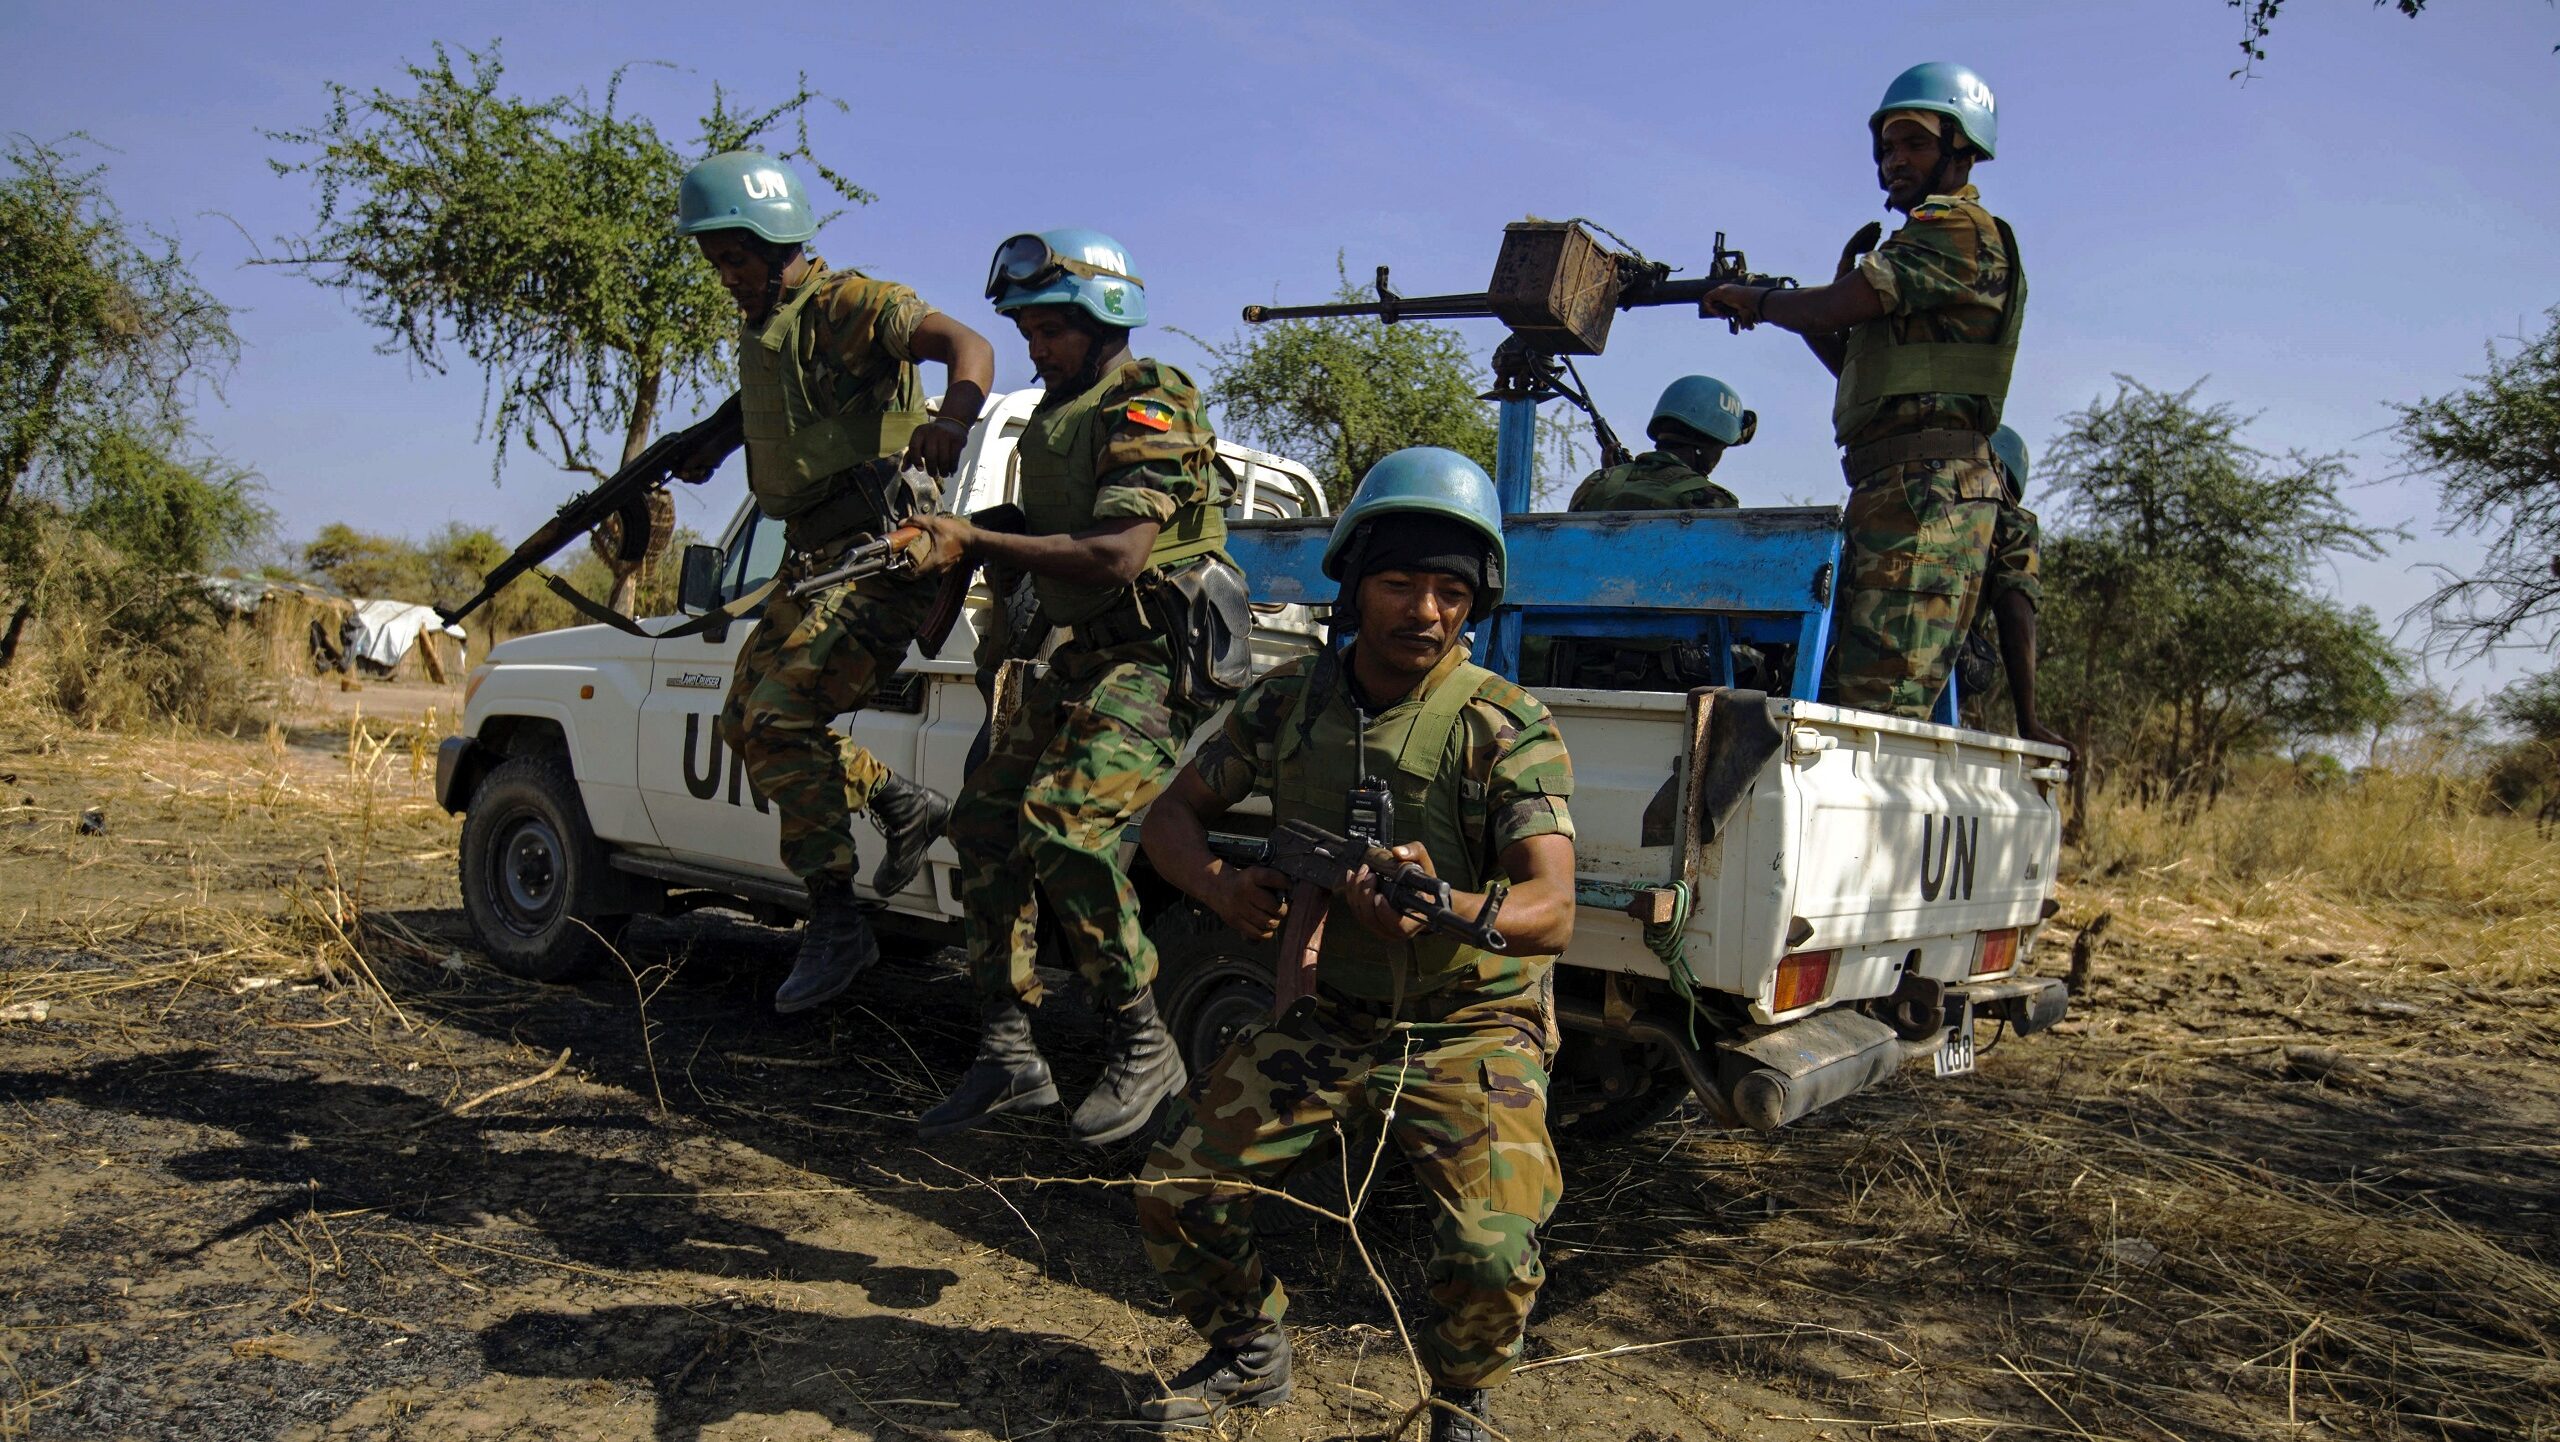 UN Reports 54 Fatalities in Abyei Clashes Including 2 Peacekeepers